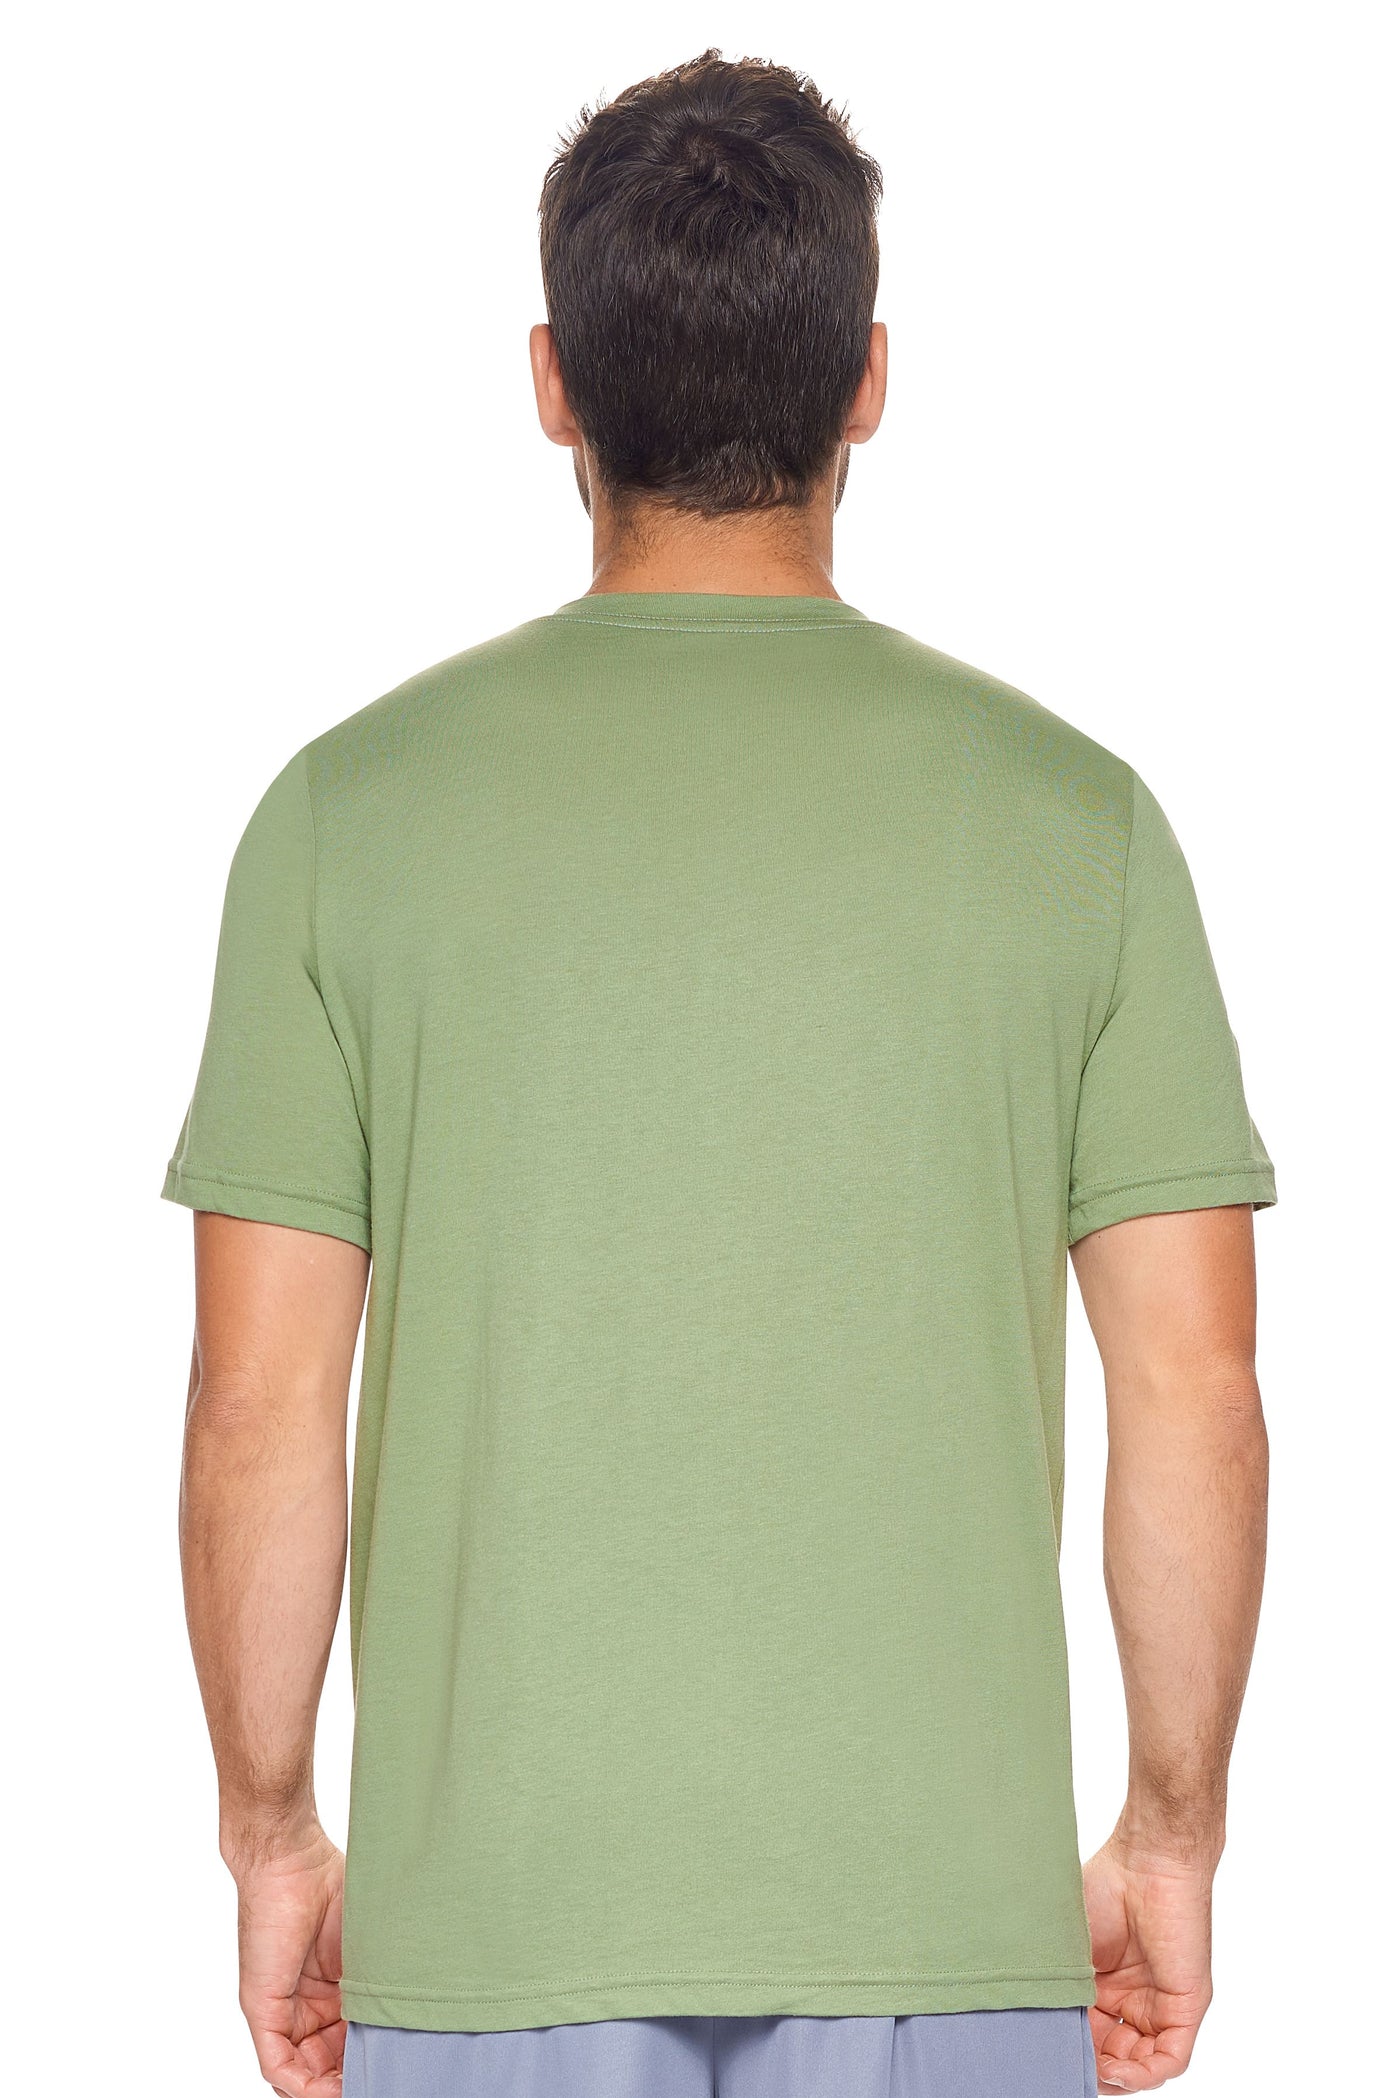 Expert Brand Retail Sustainable Eco-Friendly Apparel Micromodal Cotton Men's V-neck T-Shirt Made in USA meadow green 3#color_meadow